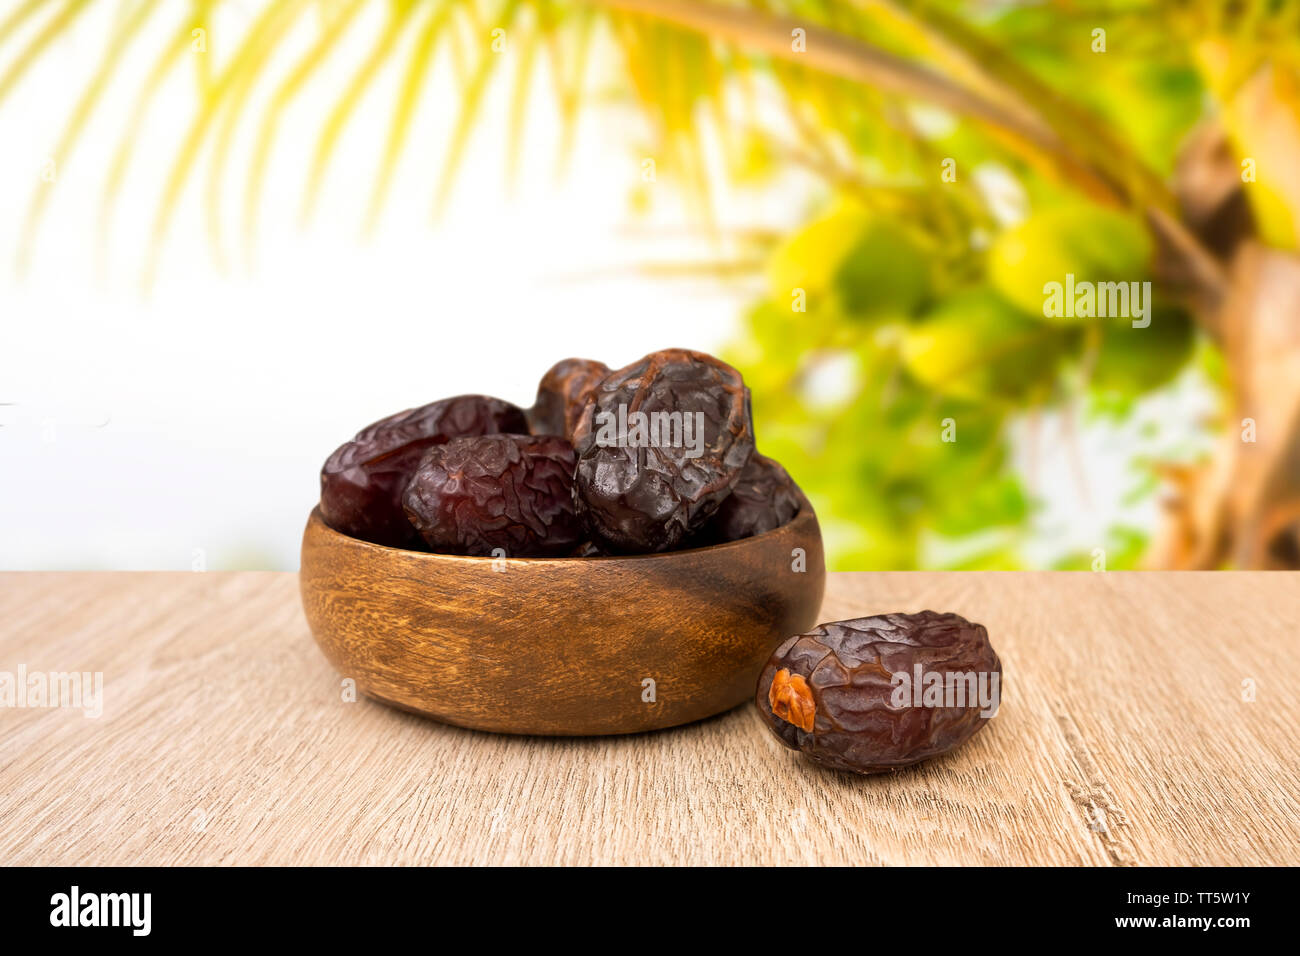 Dates fruit in bowl, background is date fruit tree Stock Photo